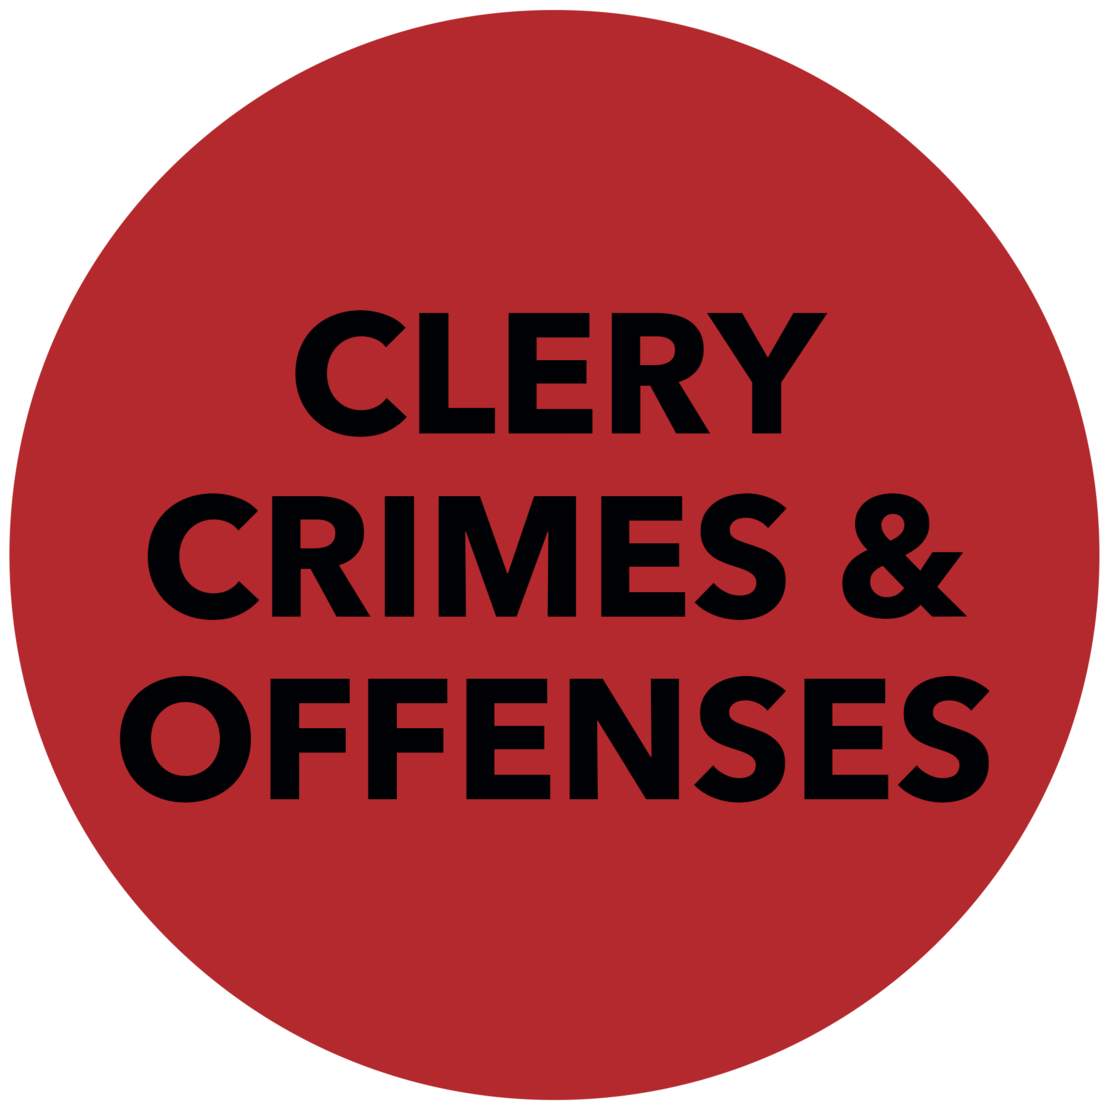 Clery Crimes & Offenses